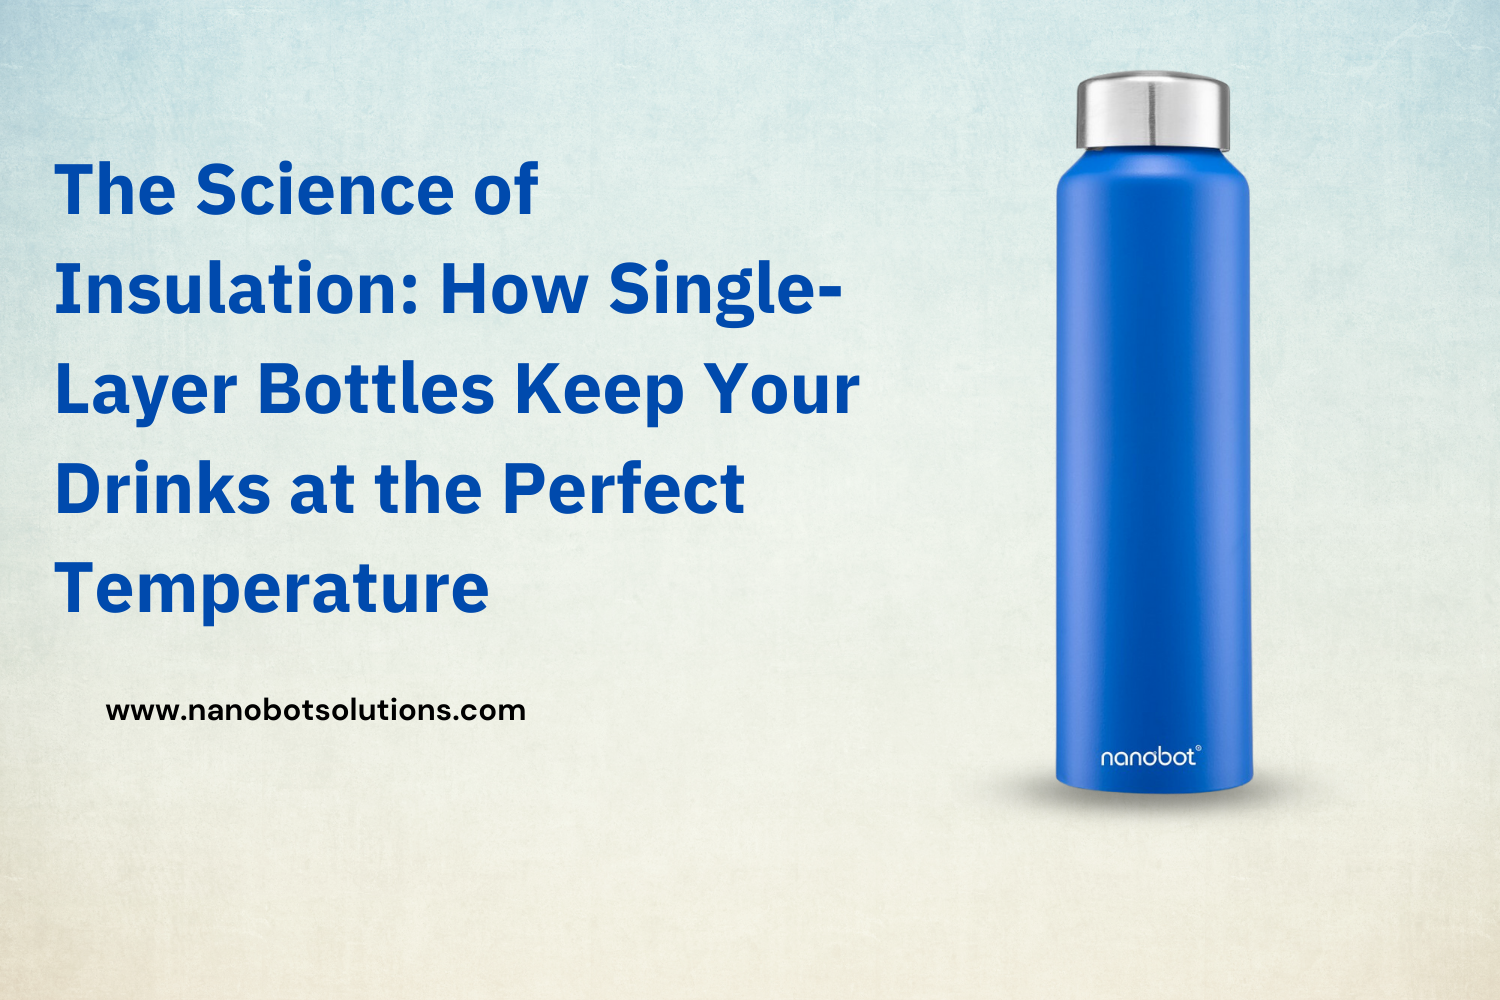 The Science of Insulation_ How Single-Layer Bottles Keep Your Drinks at the Perfect Temperature